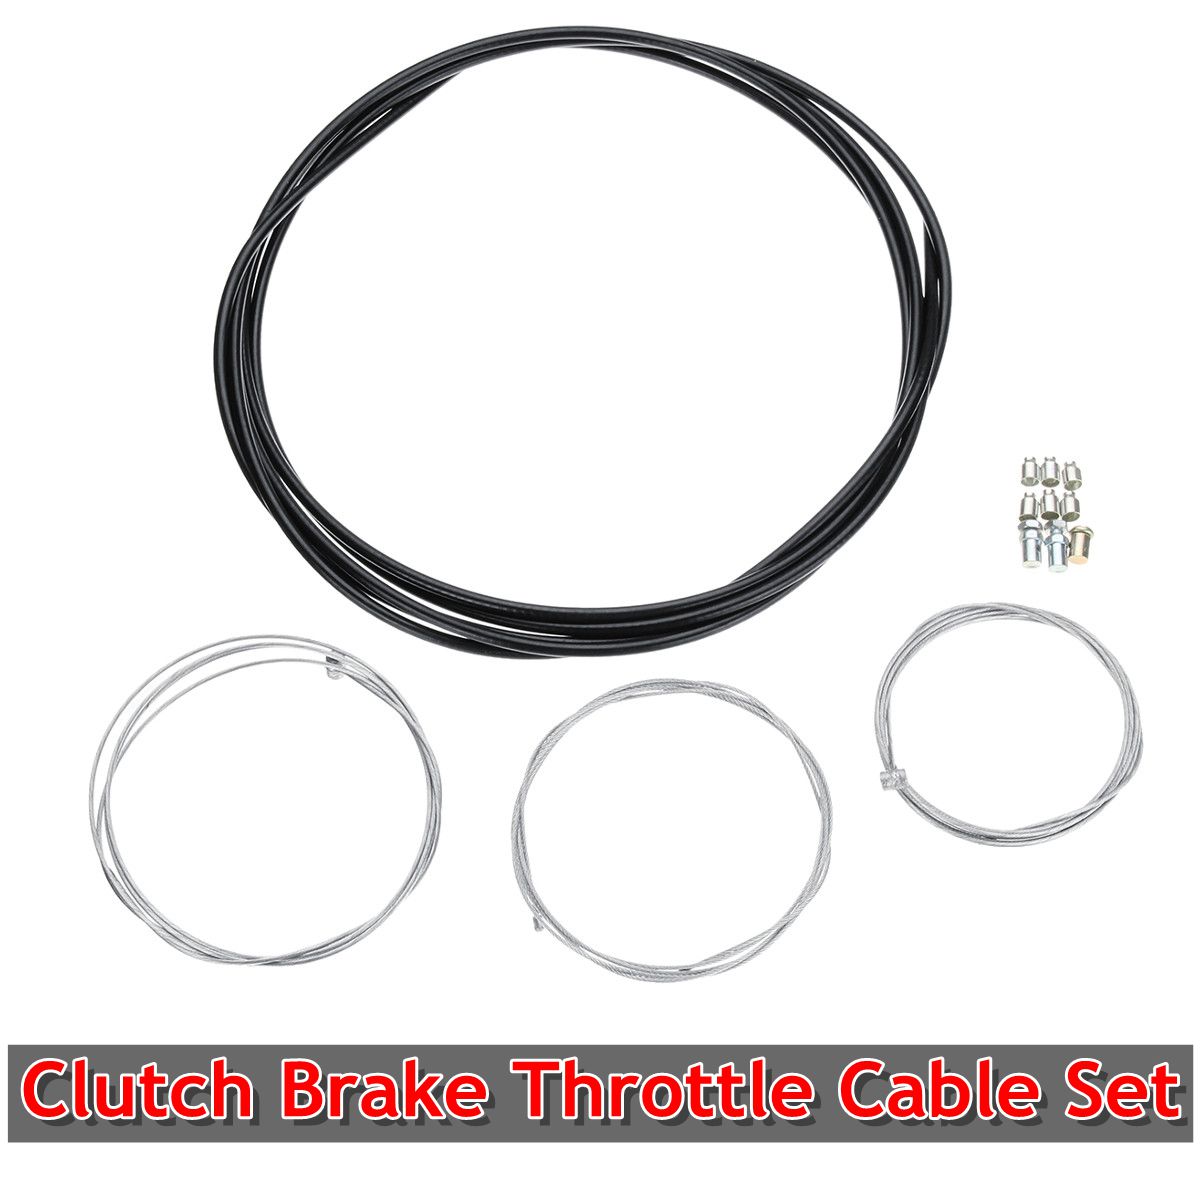 clutch brake throttle black outer cable